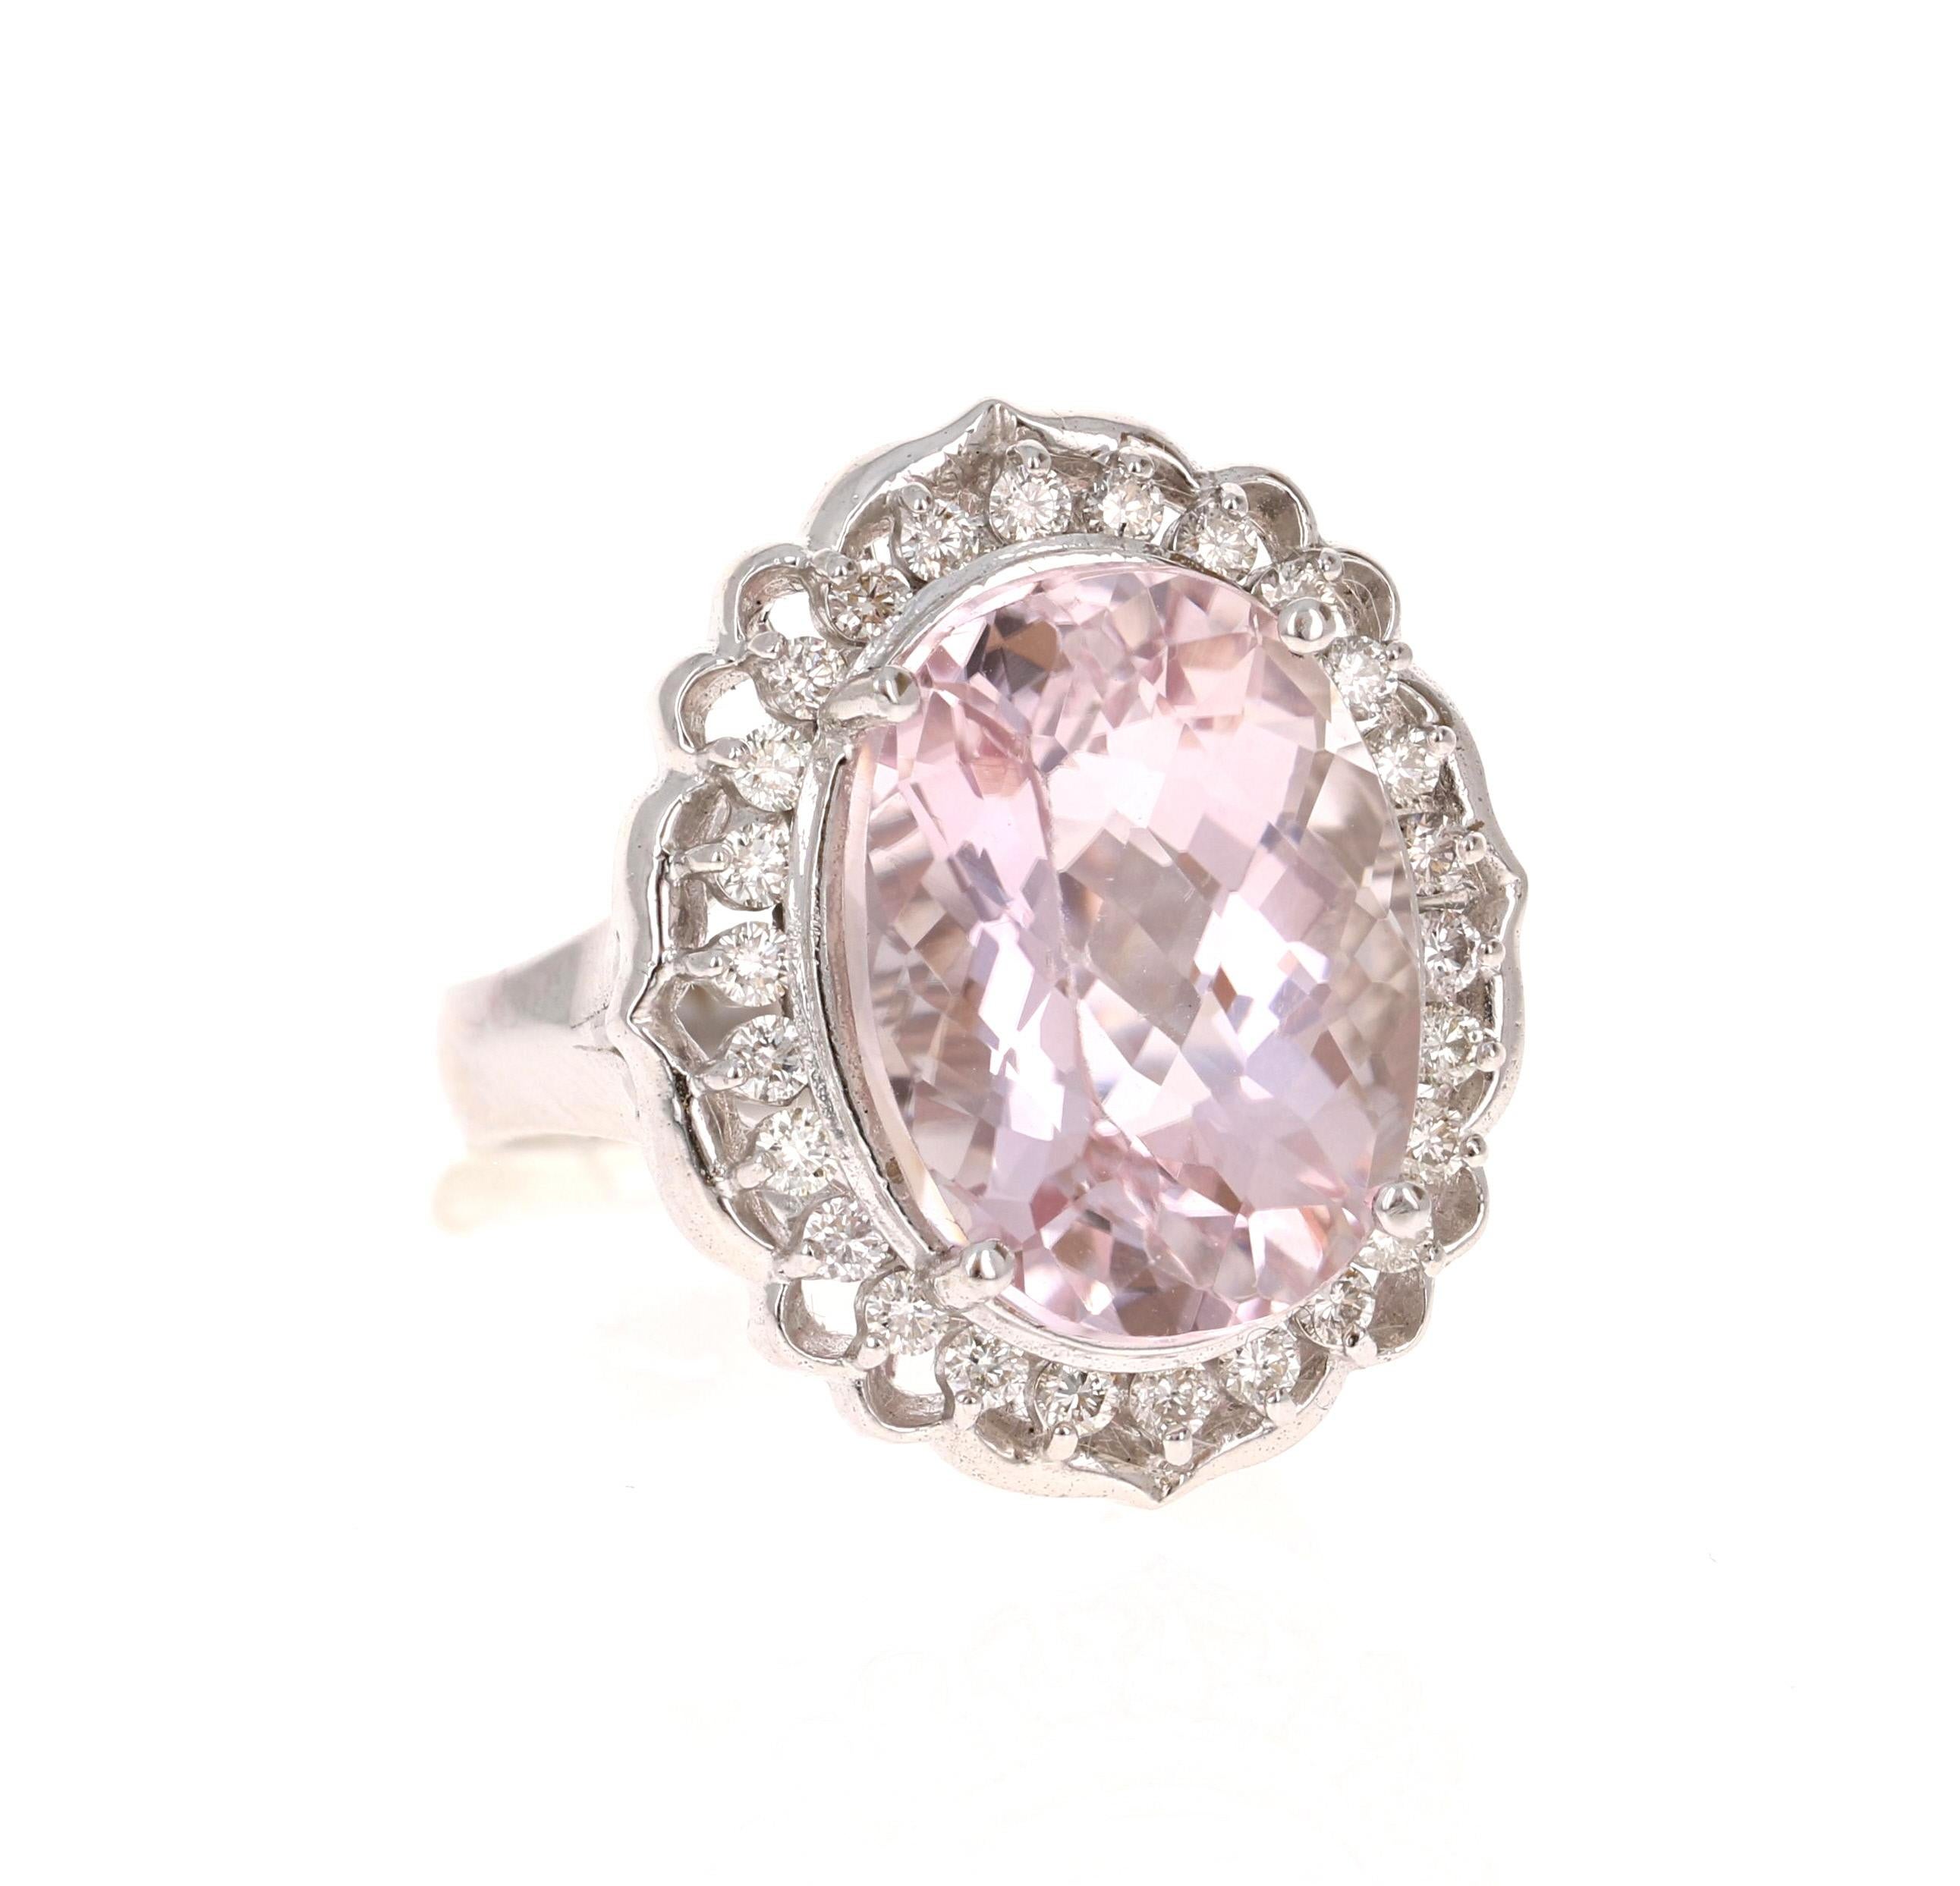 A beautiful Kunzite Ring resembling a fresh dainty flower. This gorgeous Kunzite Diamond Ring has a 11.53 Carat Oval Cut Kunzite as its center and is surrounded by 26 Round Cut Diamonds that weigh 0.56 carats. The total carat weight of the ring is